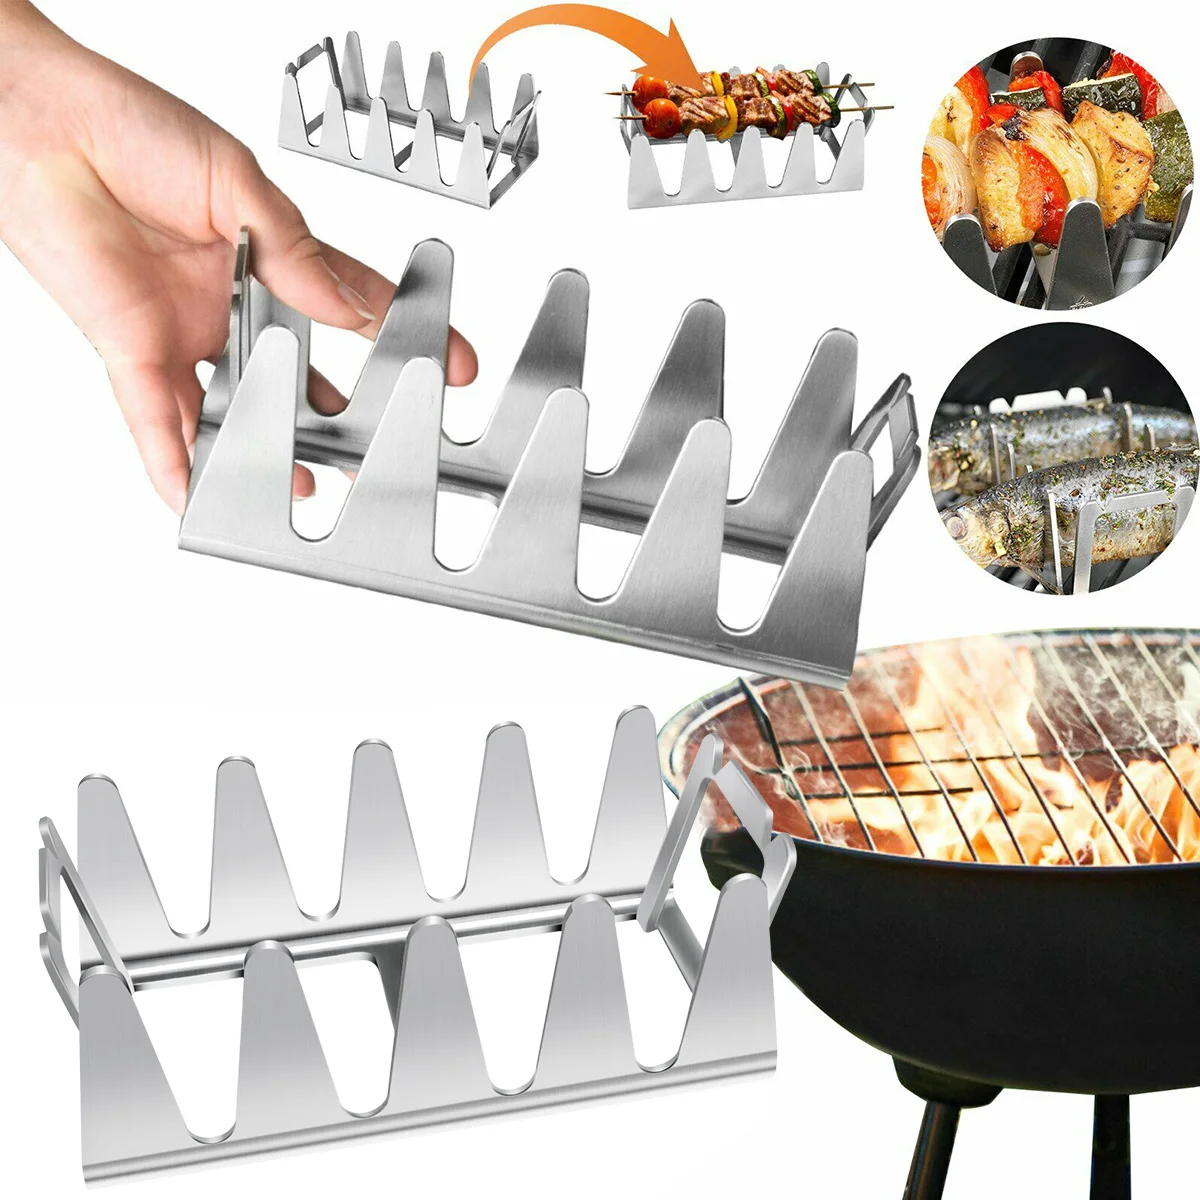 

BBQ Multi Grill Rack Robust Stainless Steel Stand Portable Firewood Bonfire Grill Holder Travel Camping Barbecue Tool Accessory